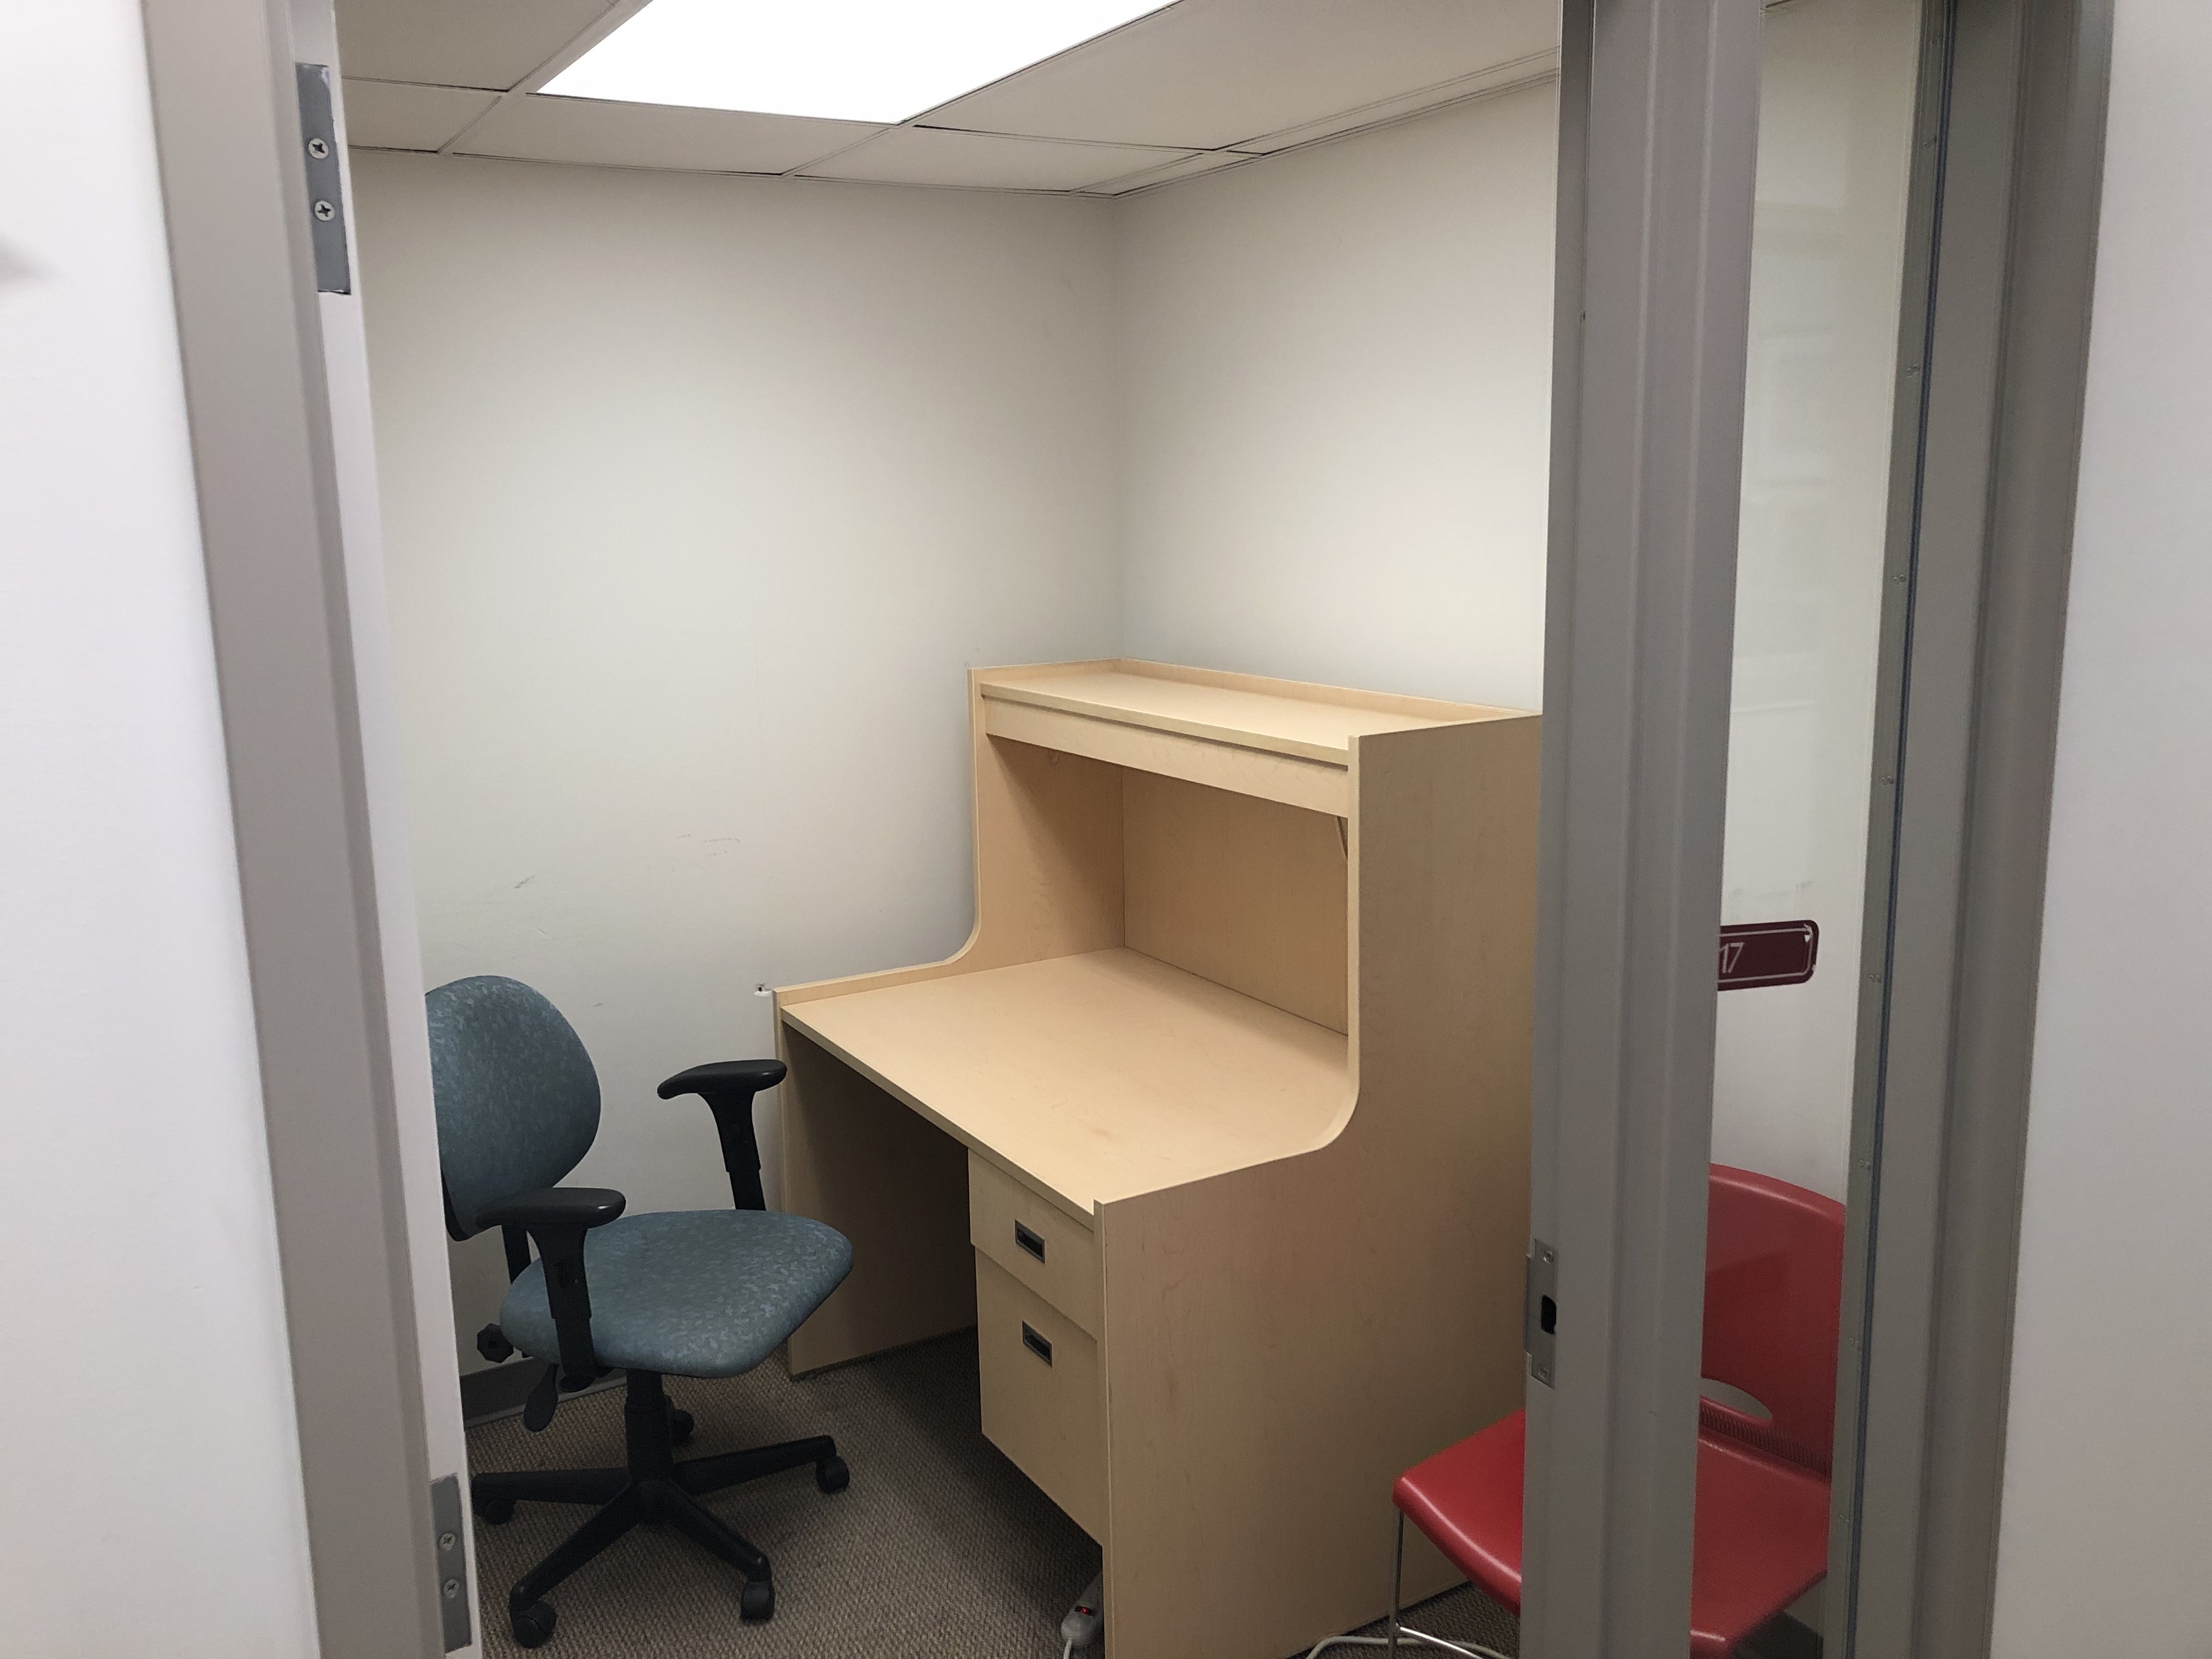 A private study room with a chair and desk.  The desk has draws. There is a tall, narrow window next to door